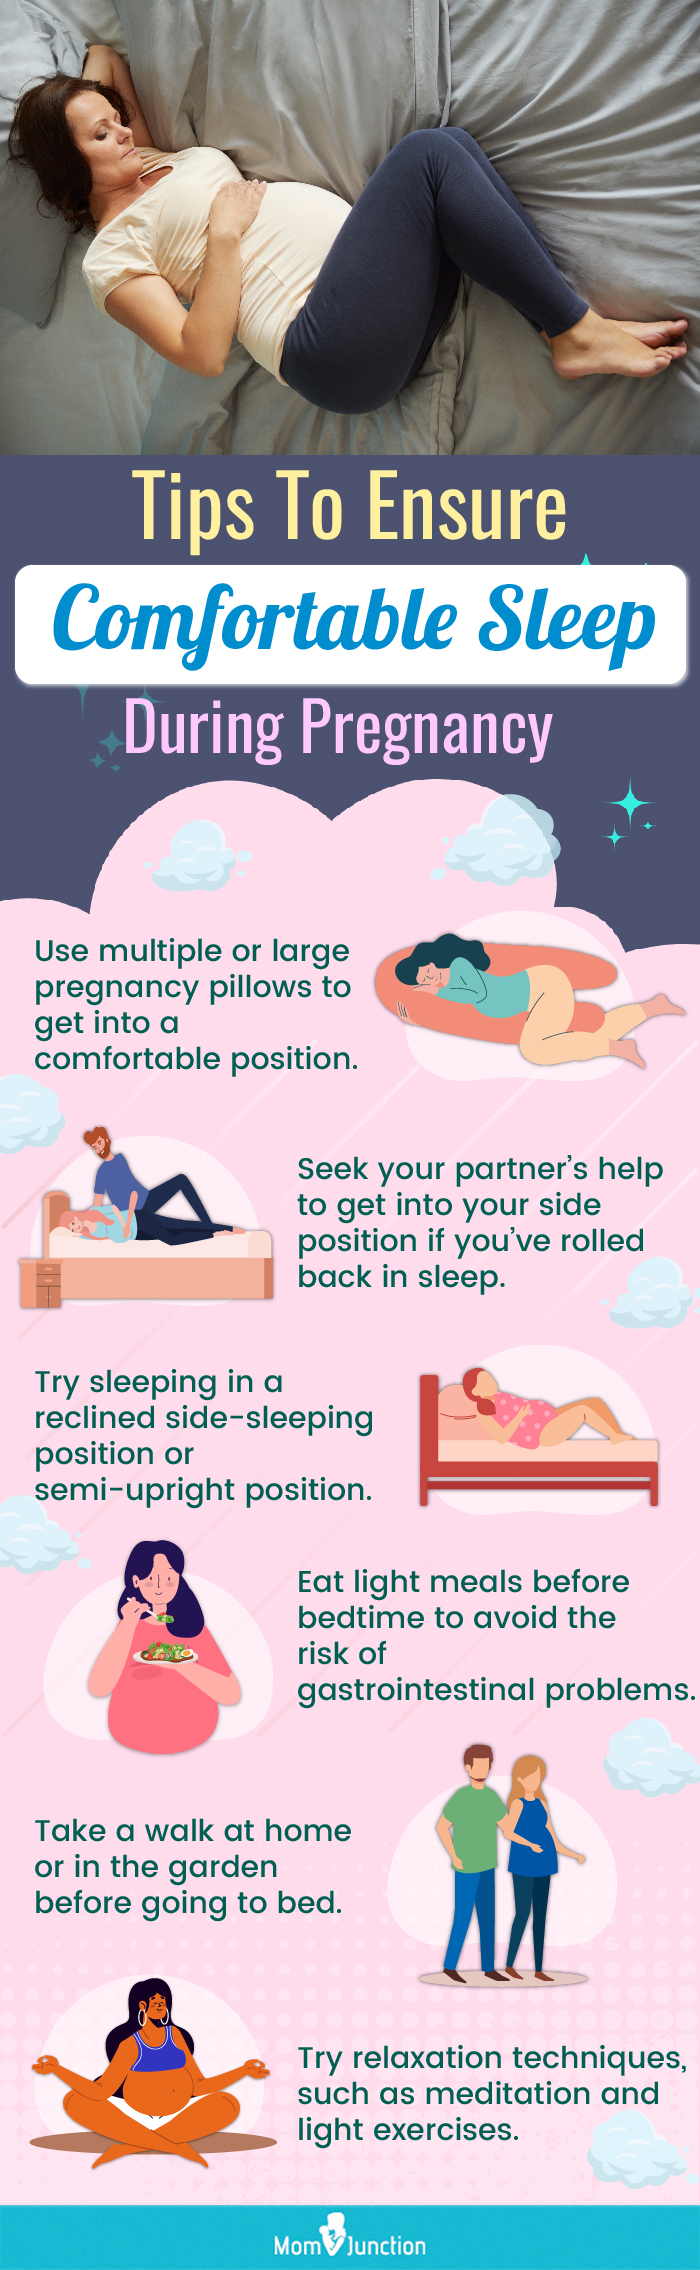 tips to ensure comfortable sleep during pregnancy (infographic)